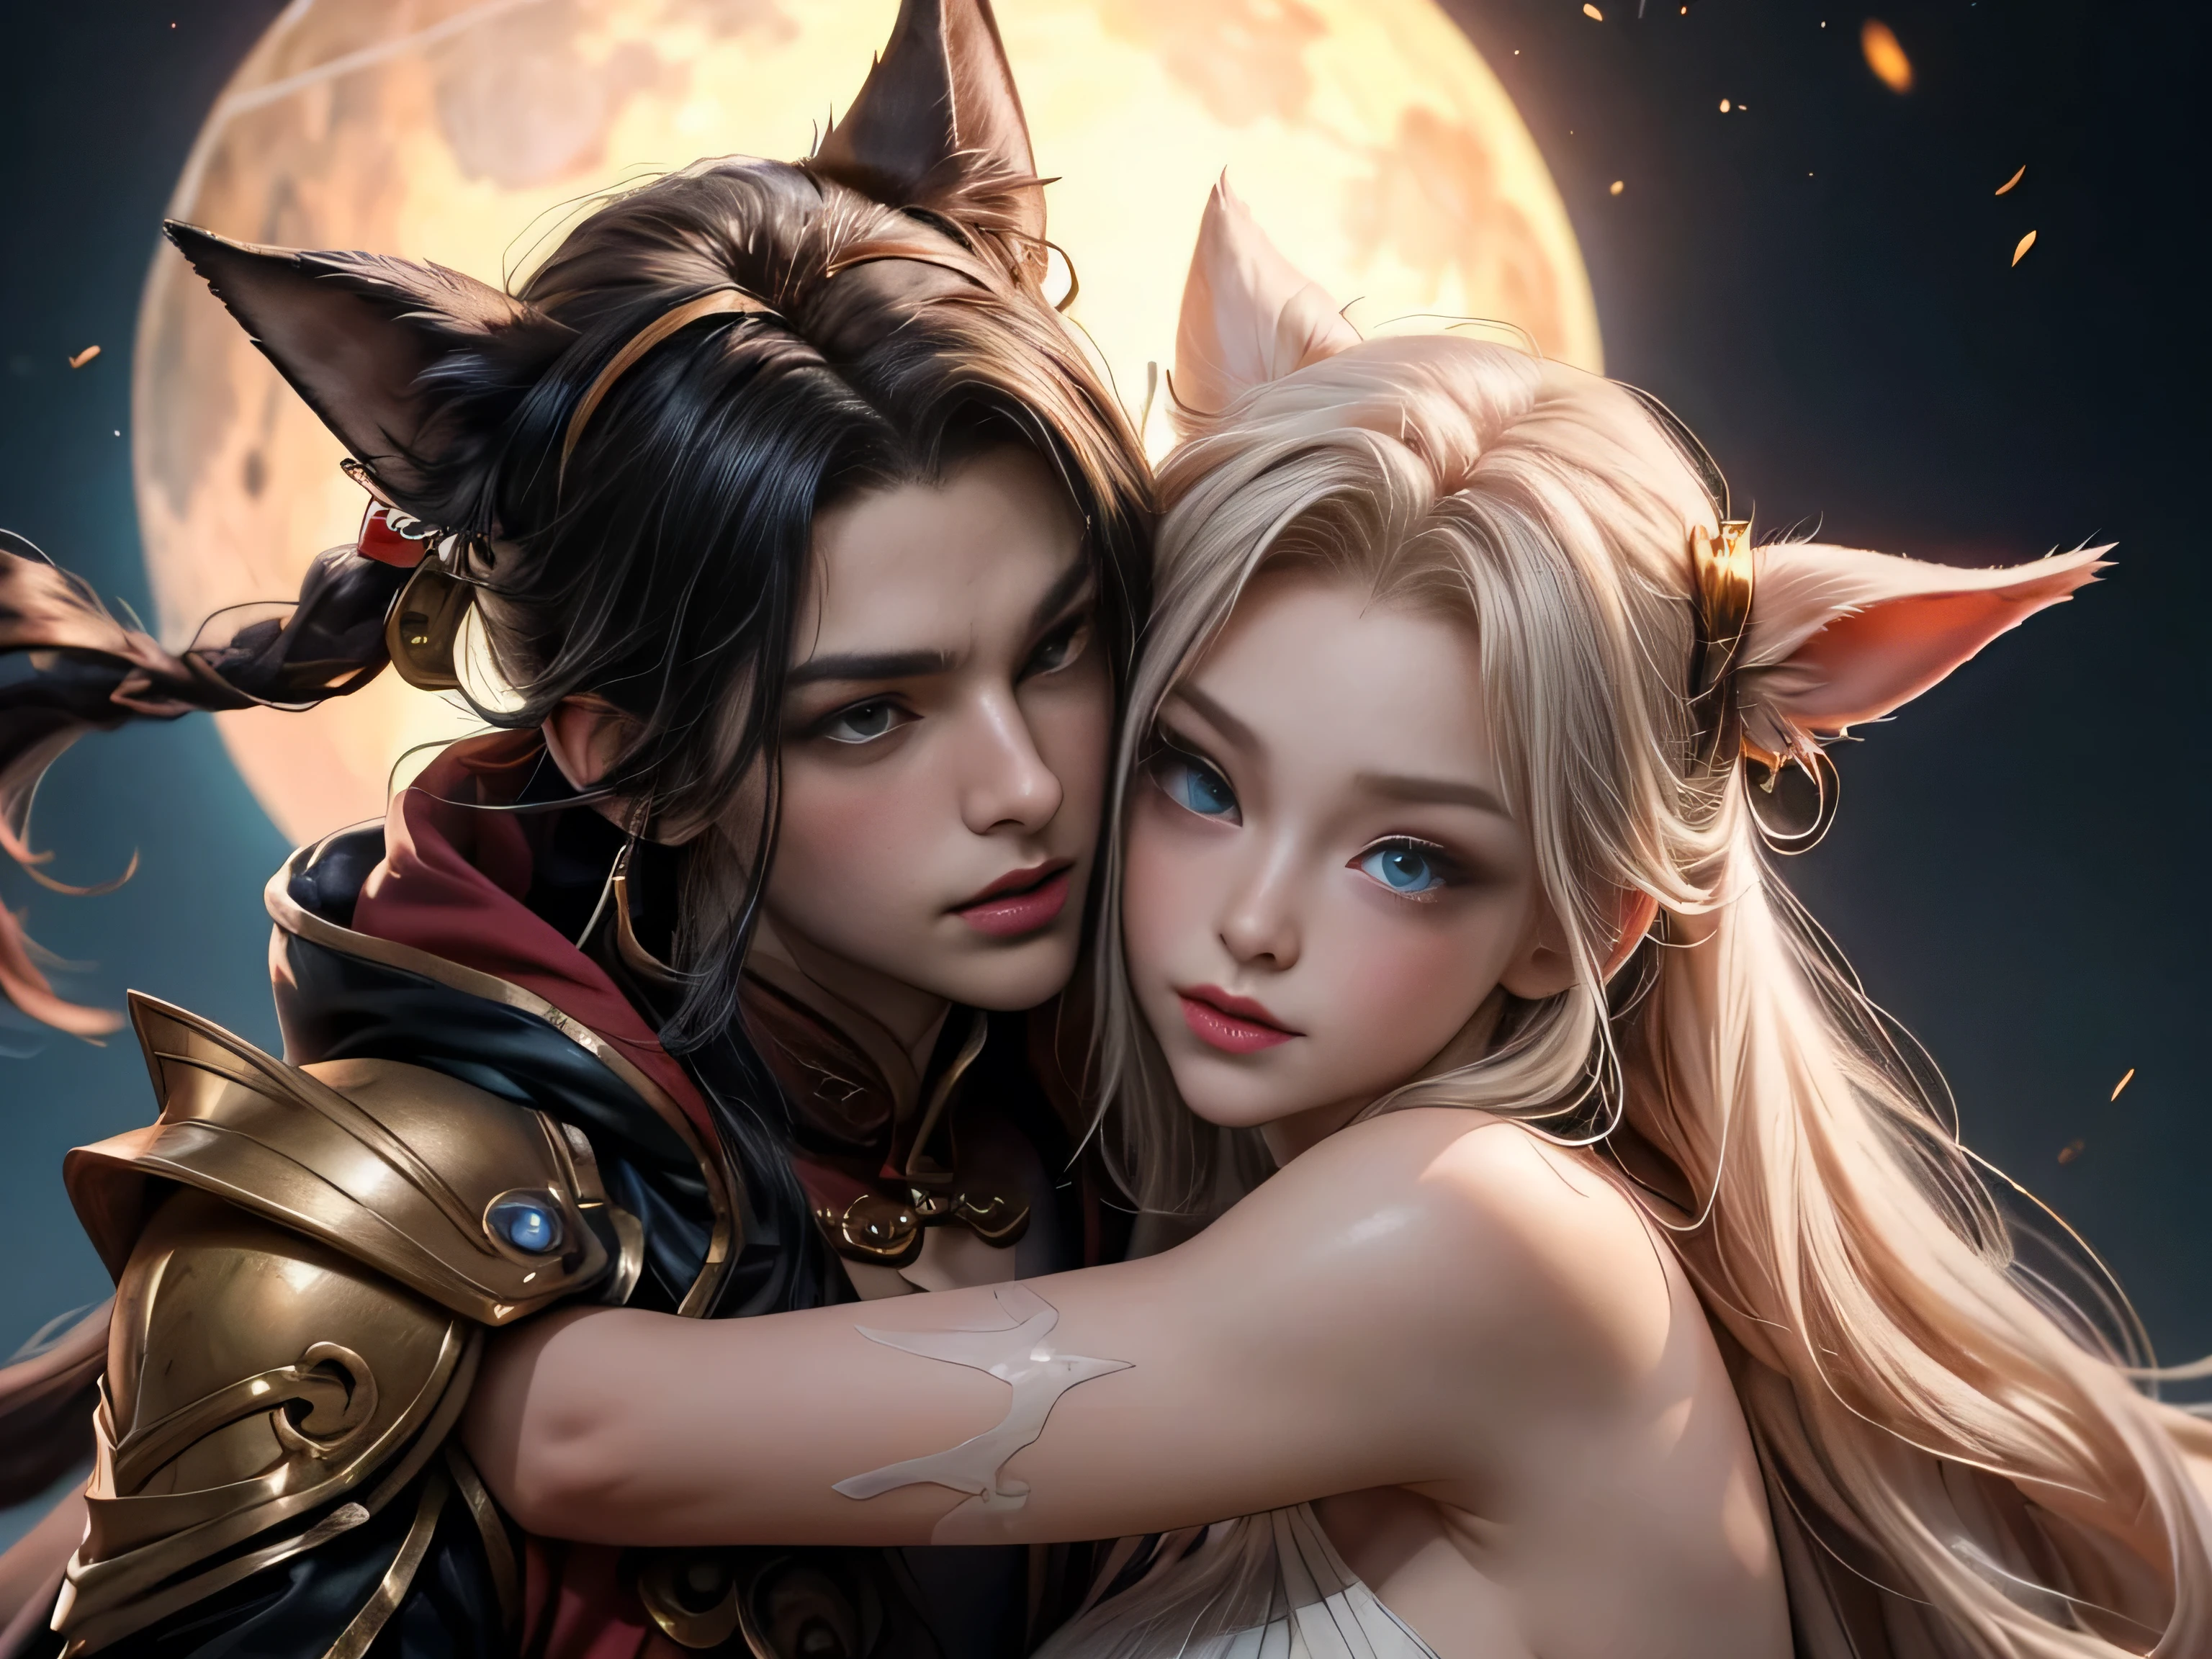 image of a man and woman couple kissing under the pink moon, Ren Renfa digital painting, Tumblr, fantasy art, xianxia fantasy, fox fantasy love, gorgeous art, love concept art, Sha Xi, 8k)), high quality fanart, Chinese fantasy, beautiful art, long, fan art, beautiful avatar pictures, Cai Xukun, 8k character details, high quality anime art, high quality illustration, detailed anime wallpapers, detailed anime art, hyper realistic, elegant, high quality realistic anime art, ((Finely drawn eyes )) [Perfectly detailed eyes((Beautiful eyes, like jewels) drawn in very detail)[clearly drawn pupils]],[eye light[Accurate eye lighting]],[long and beautiful eyelashes],[accurately drawn hair [Beautiful and shiny hair, detailed]], (Perfect hand-detailed [Beautiful fingers without damage [beautiful nails]]), (perfect anatomy (perfectly balanced proportions)) [[Full-length portrait]], [perfect color combination (Accurate imitation of interaction light and materials)],([Precise detail](detail, high)),[Visual art that tells a story],((highest quality)high [[High density drawing]])(4K quality)